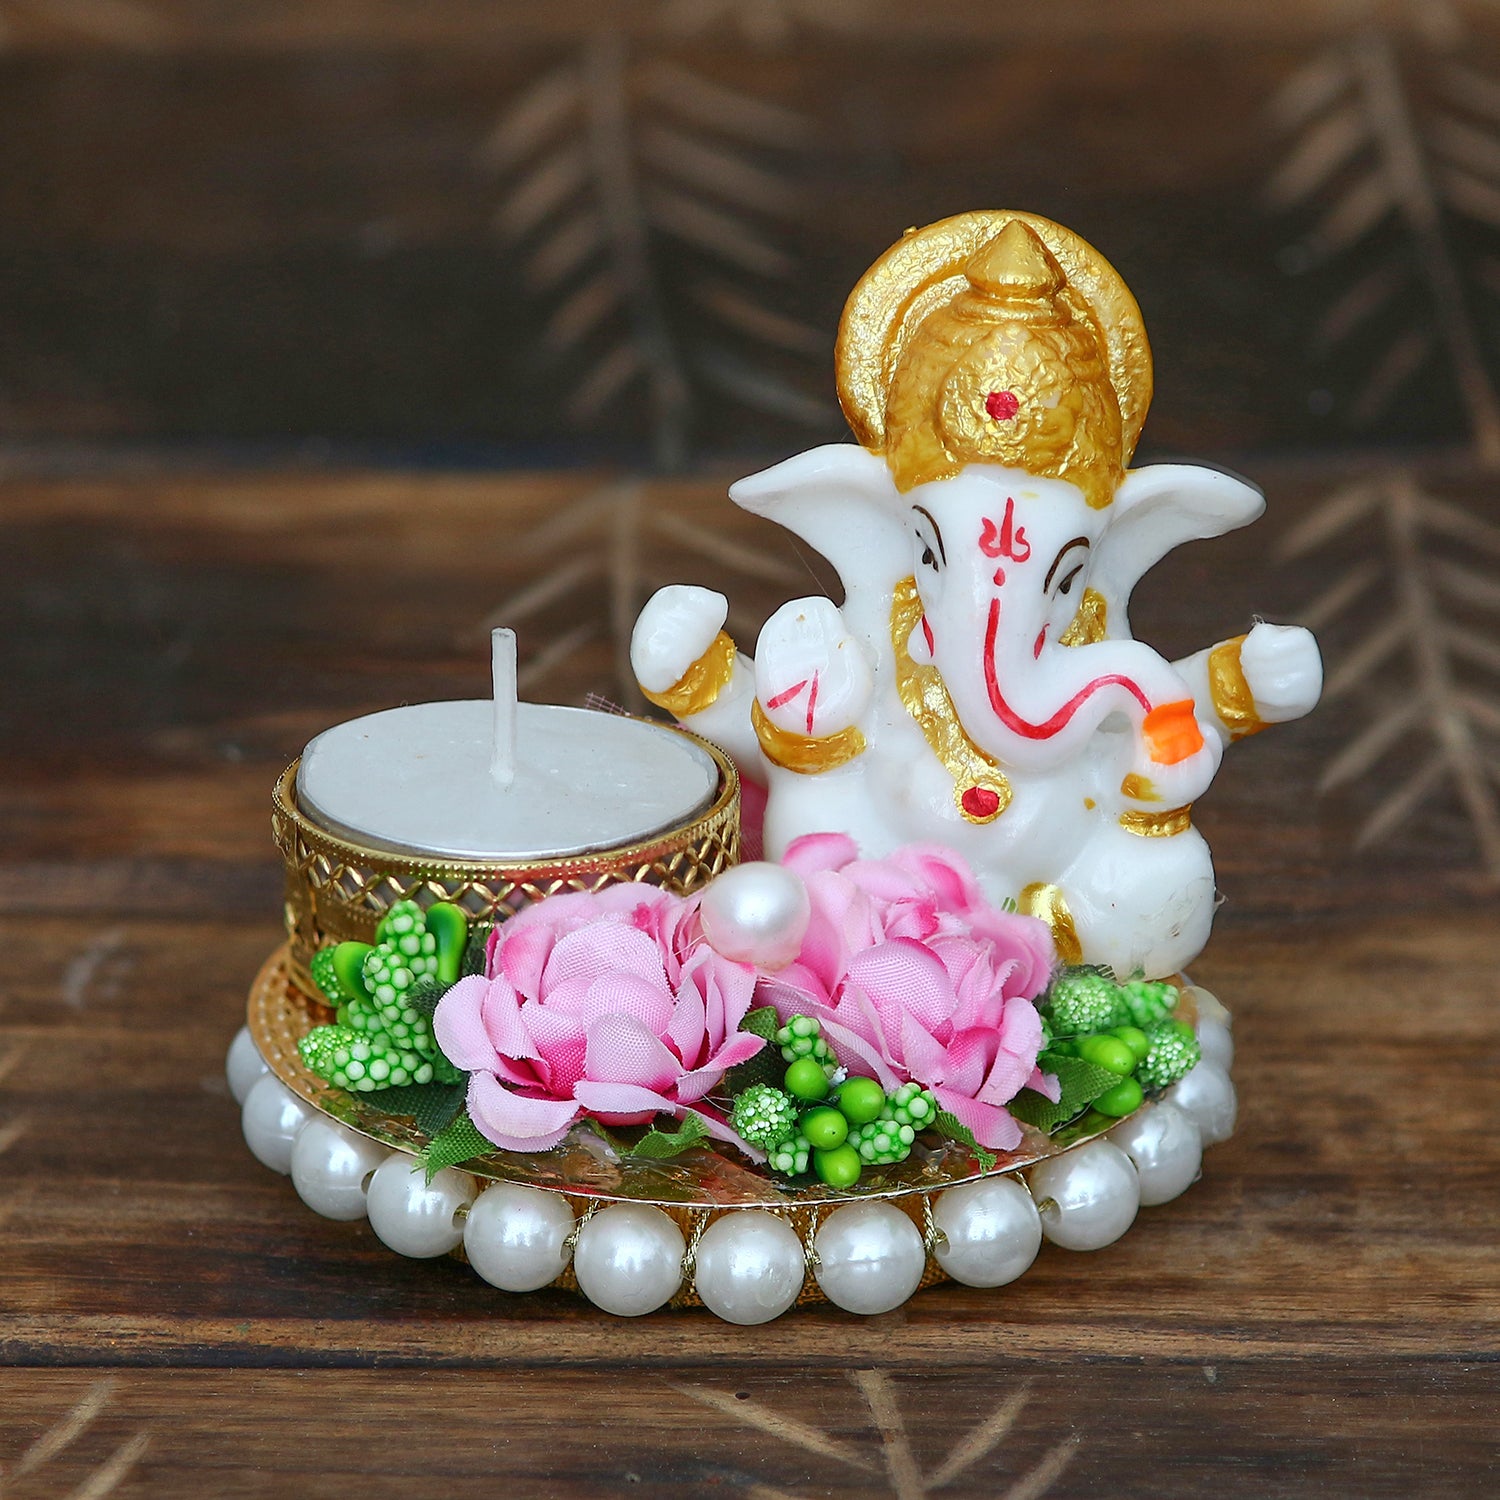 Polyresin Lord Ganesha Idol on Decorative Metal Plate with Tea Light Holder (Pink, Green and White)